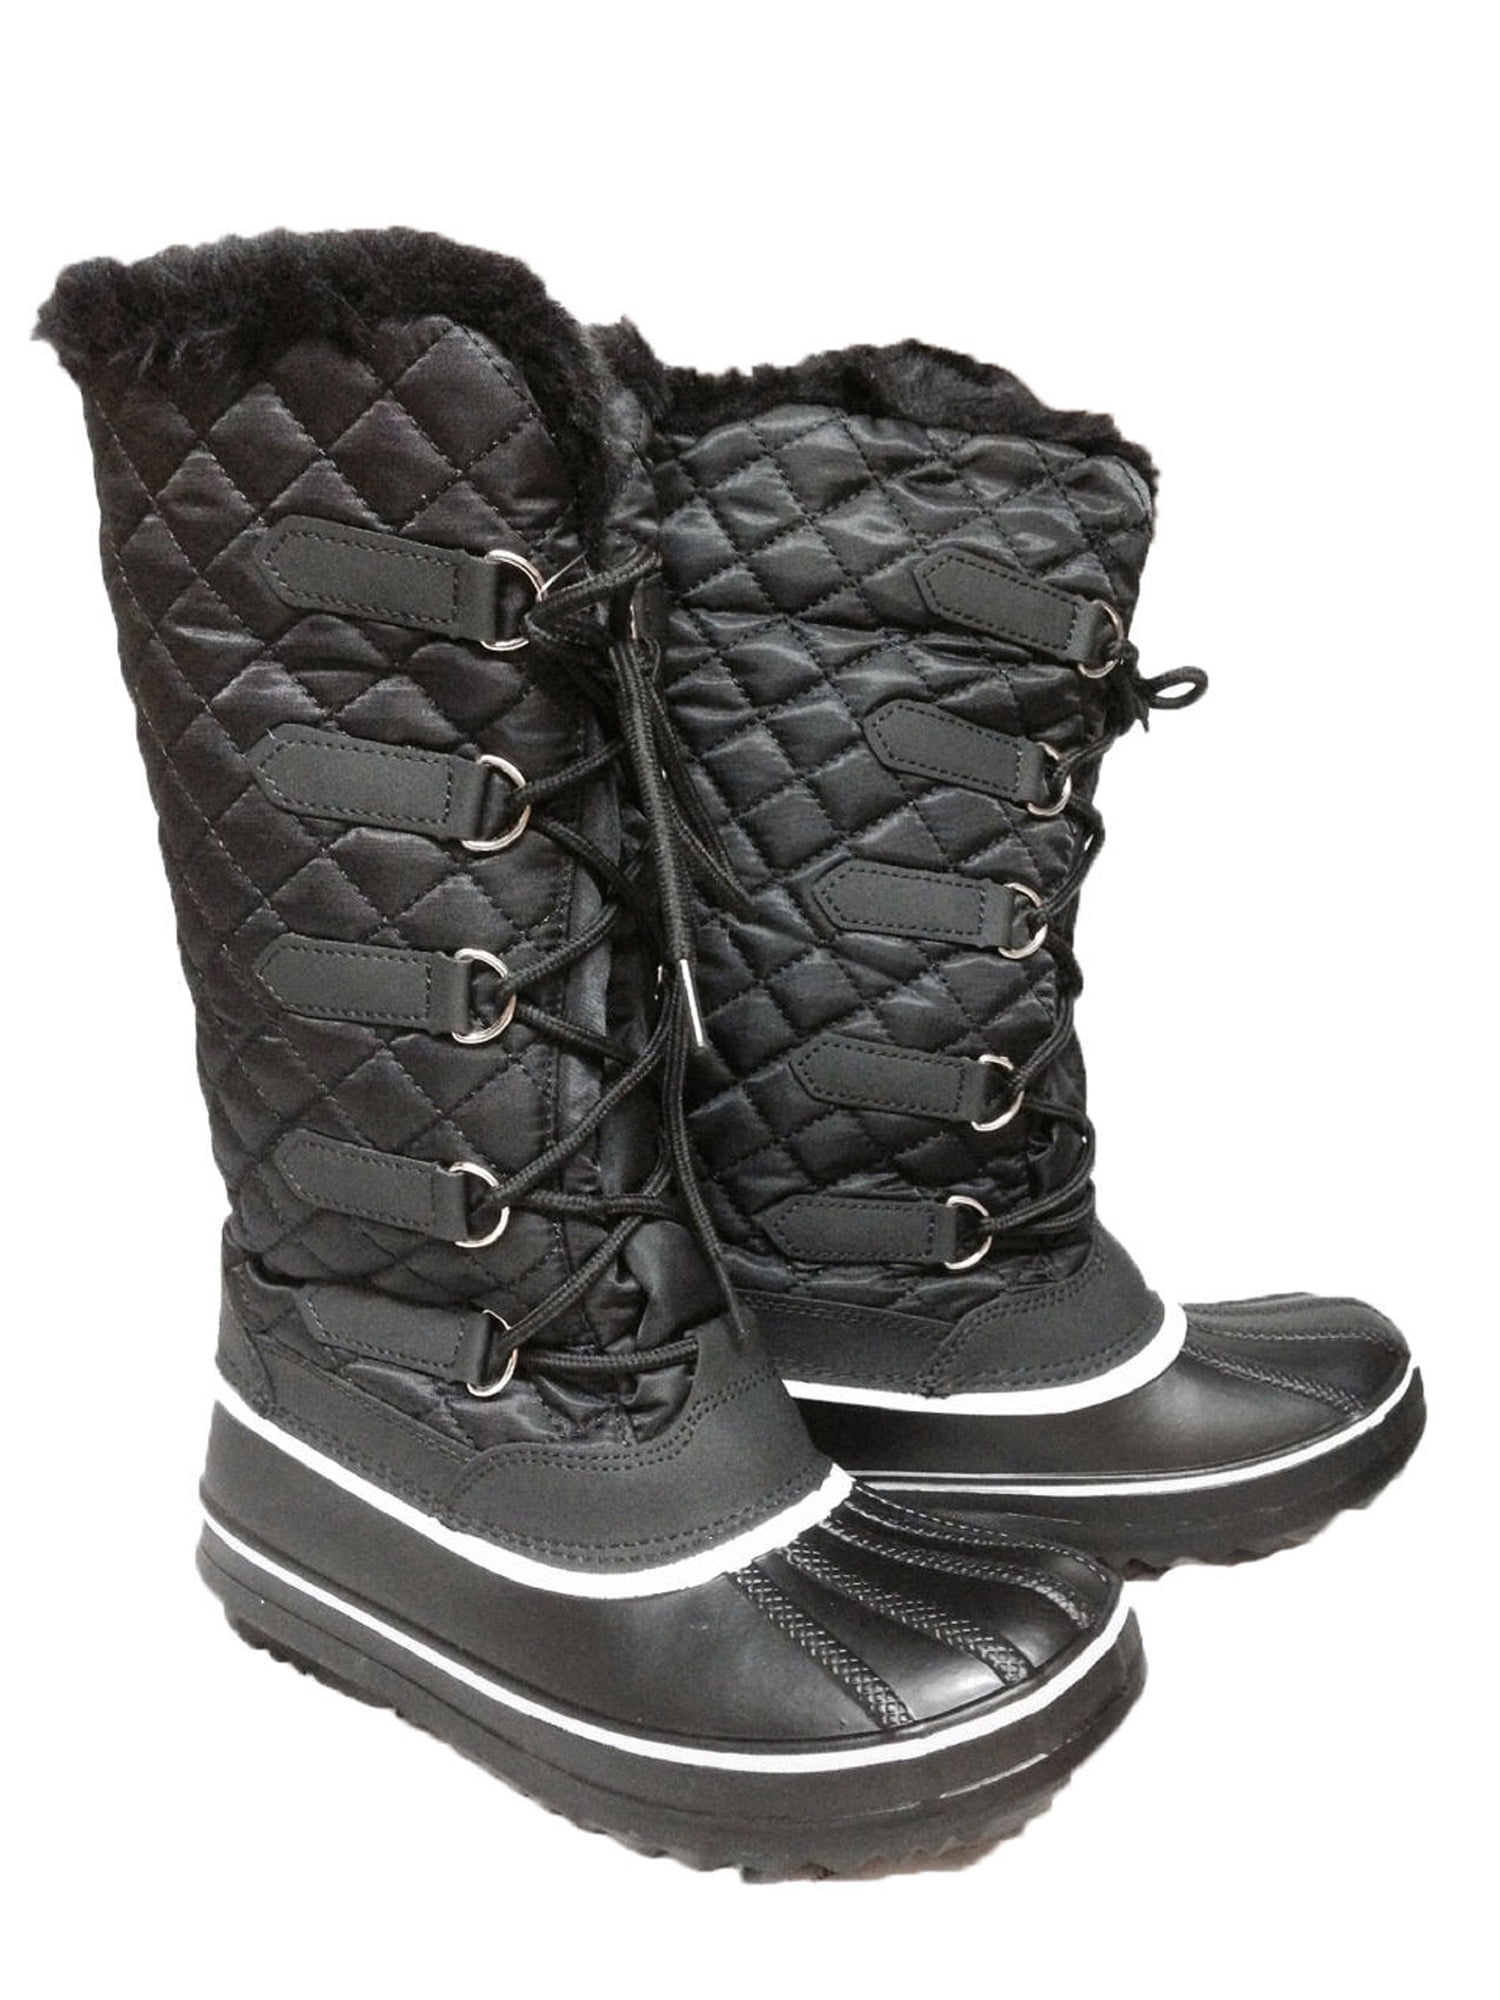 Womens Winter Snow Boots Mid-Calf Water Resistant Outdoor Warm 